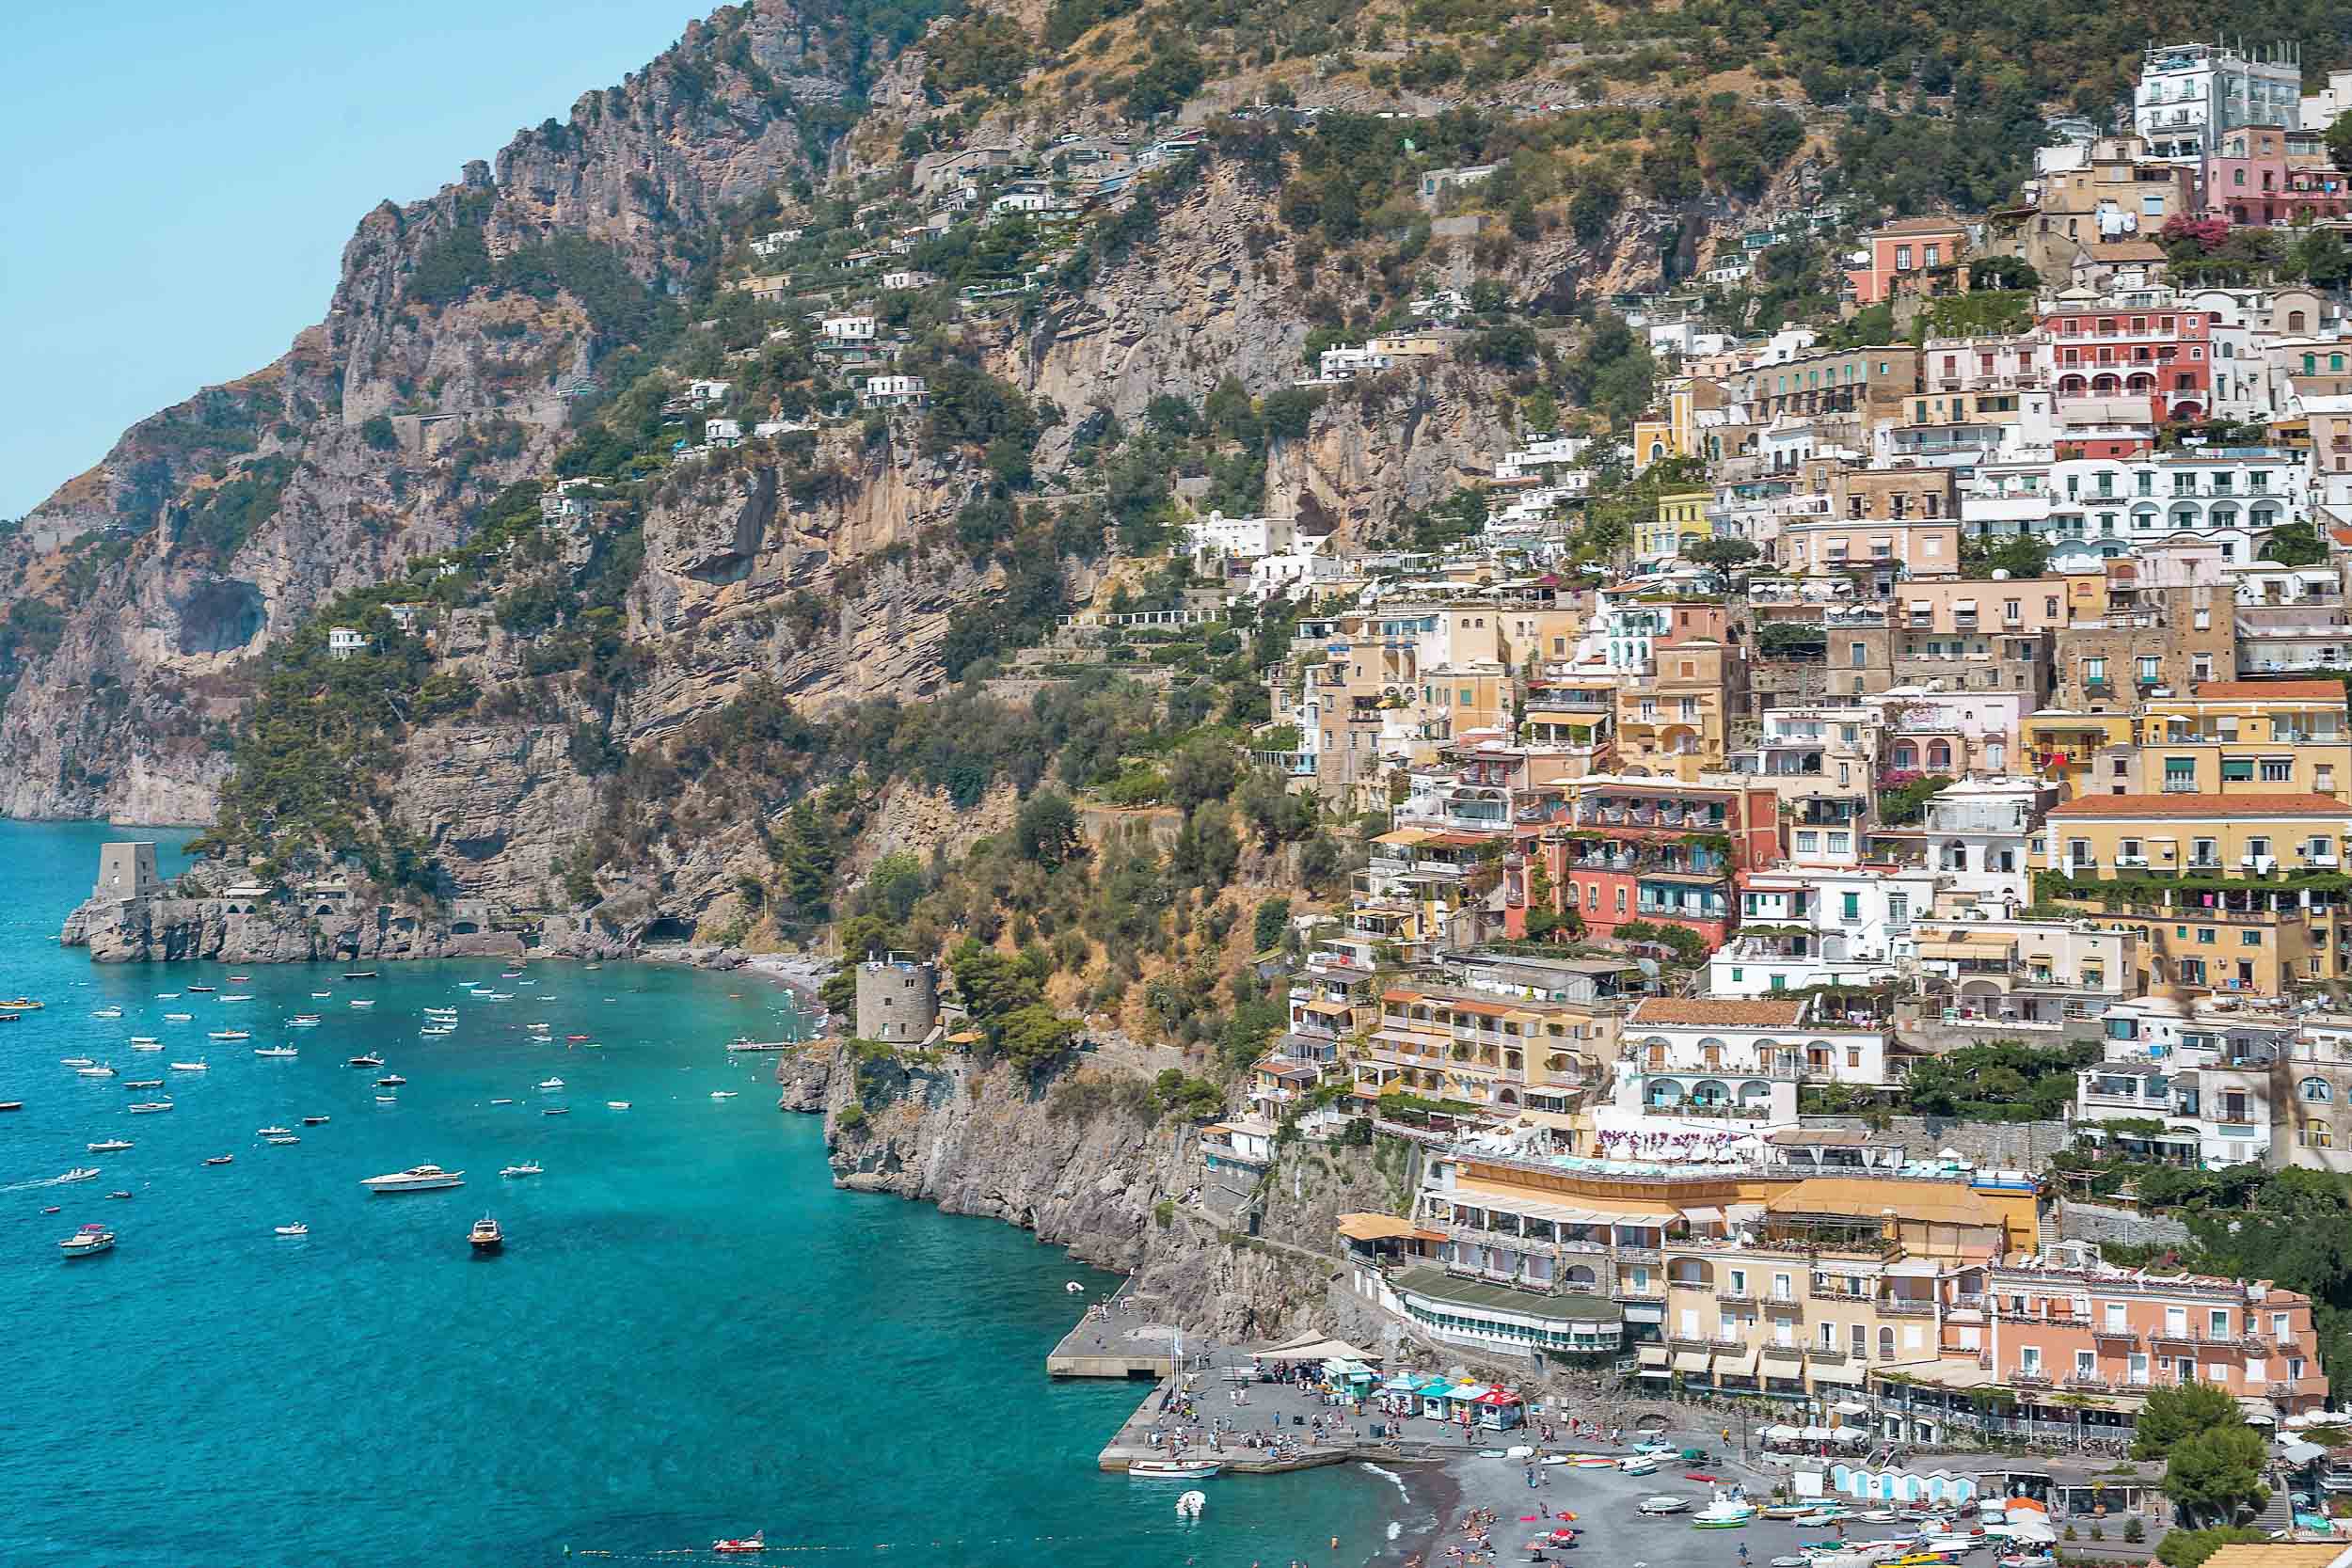 How to get to Positano via ferry or cab from Naples or Salerno